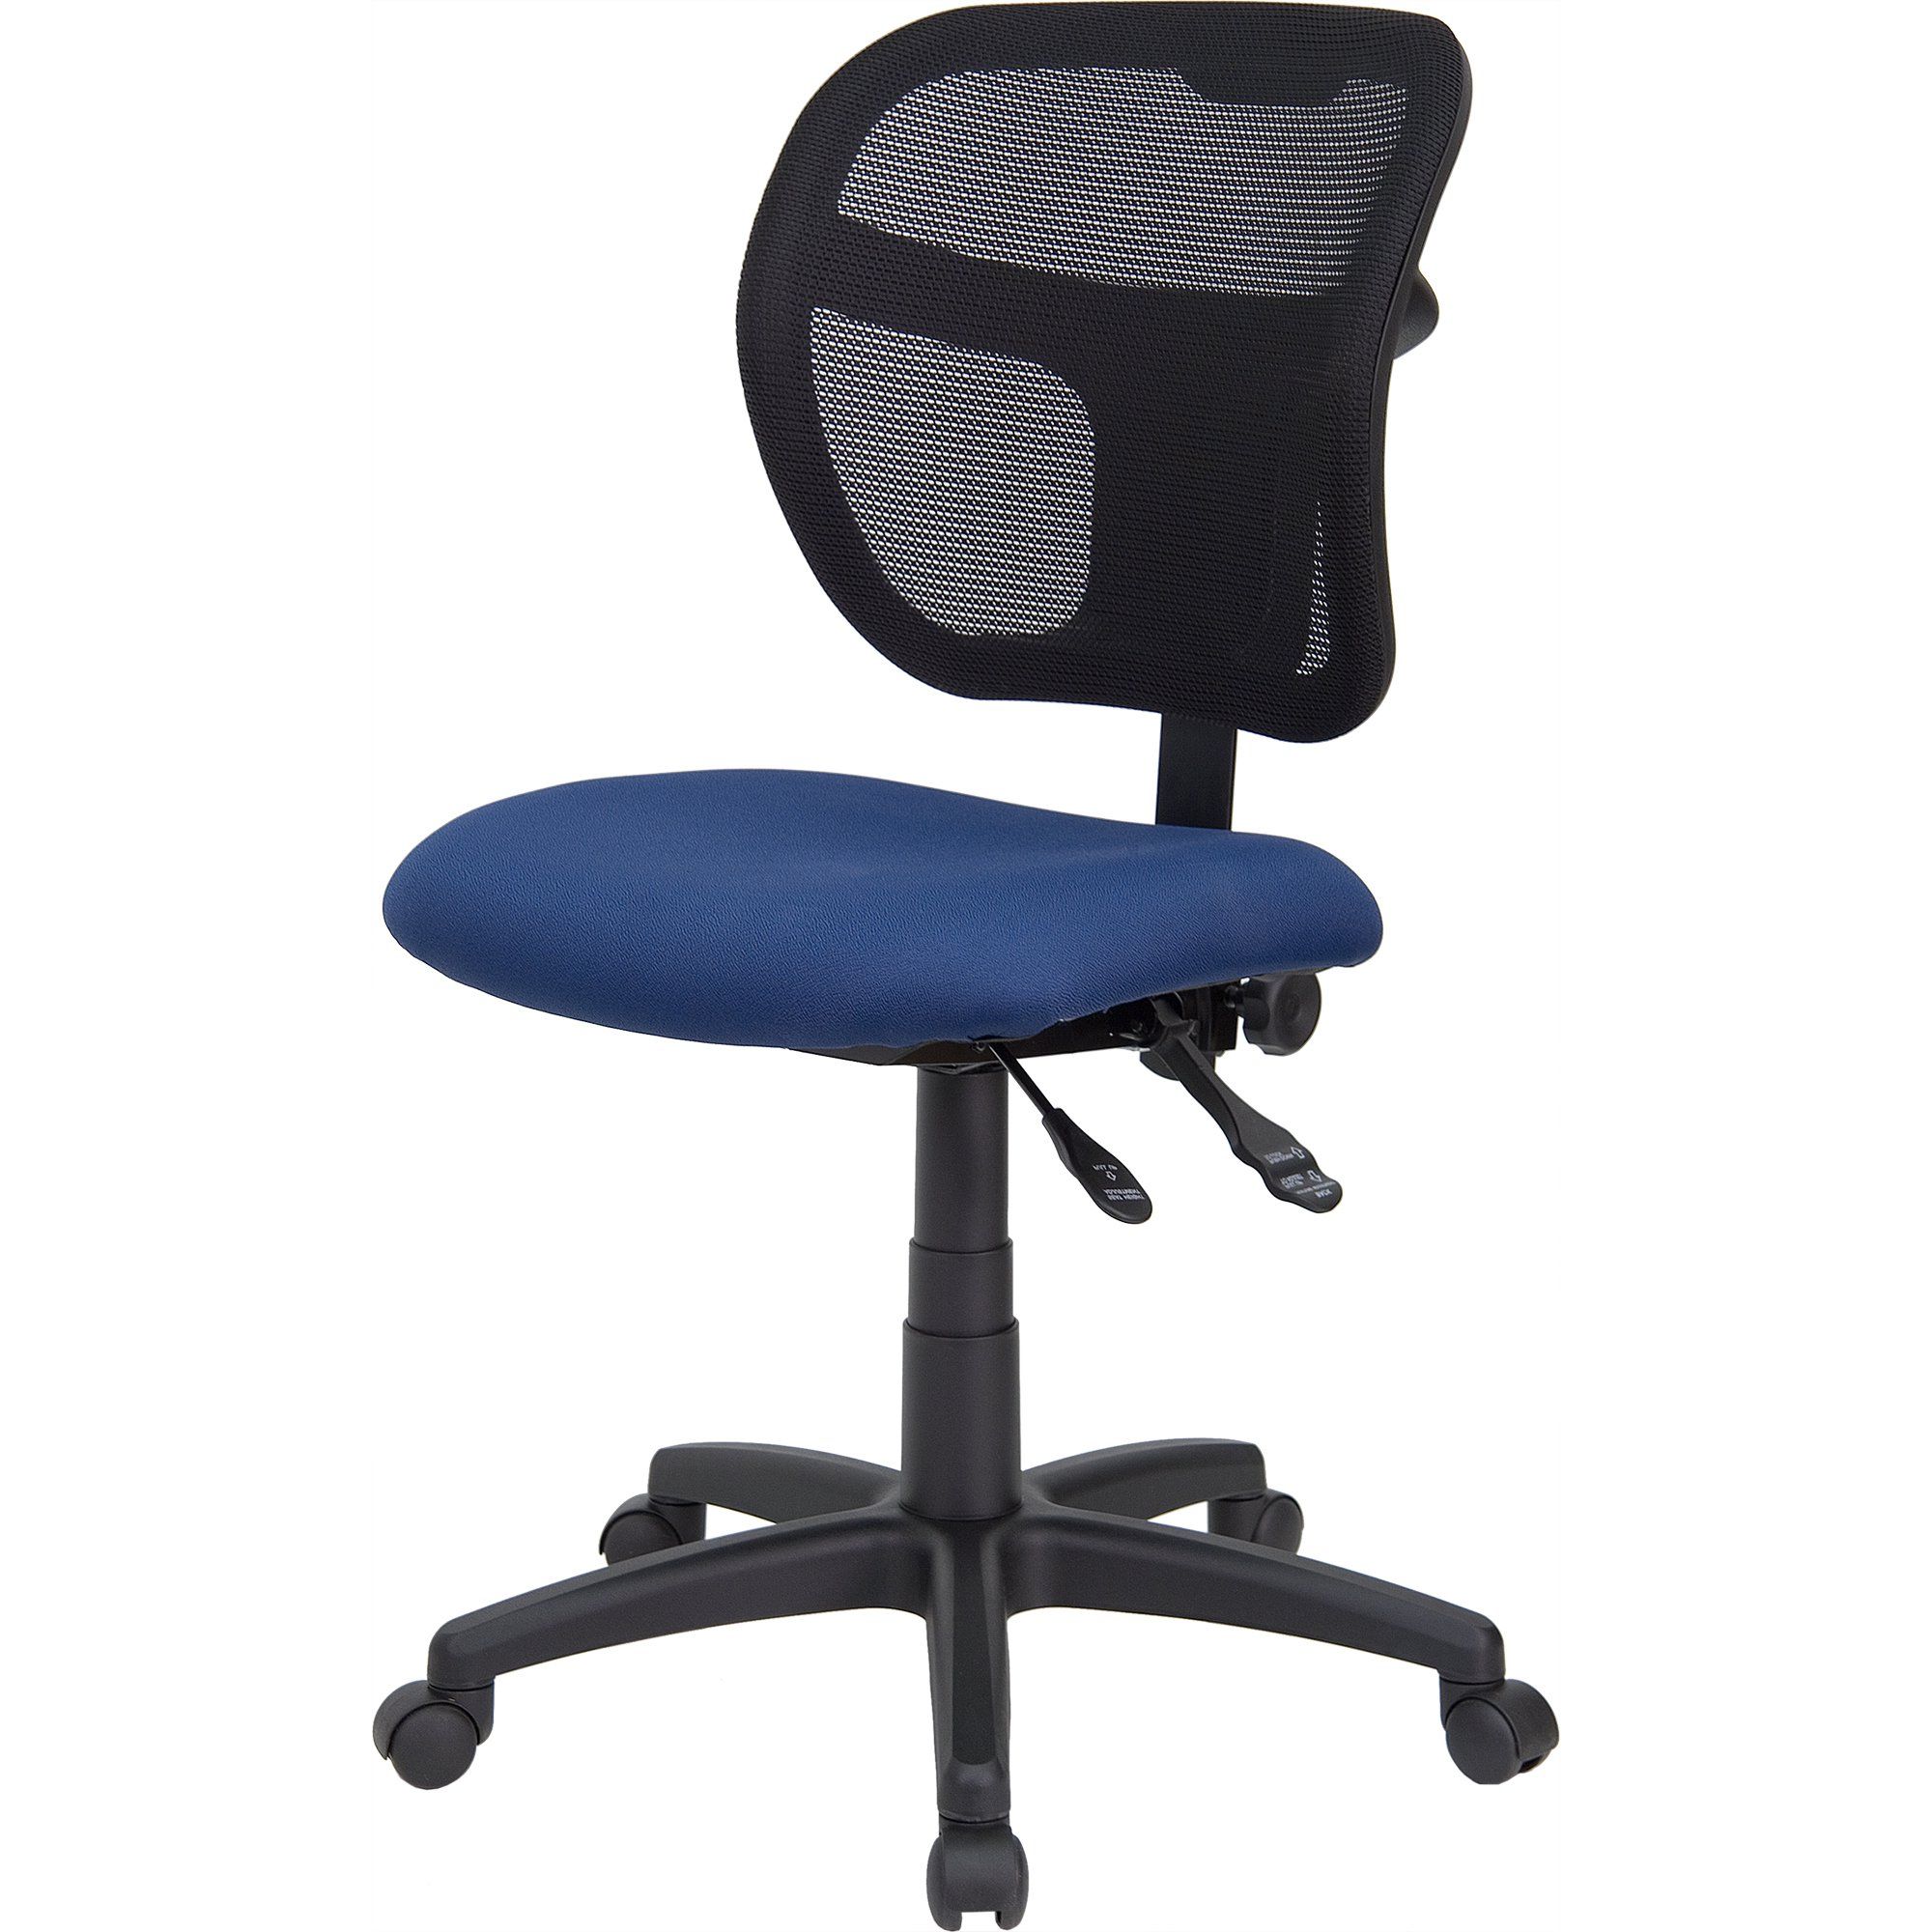 Popular Theo Ii Swivel Chairs Intended For Shop Theo Mesh Dual Paddle Control Swivel Adjustable Armless (View 10 of 20)